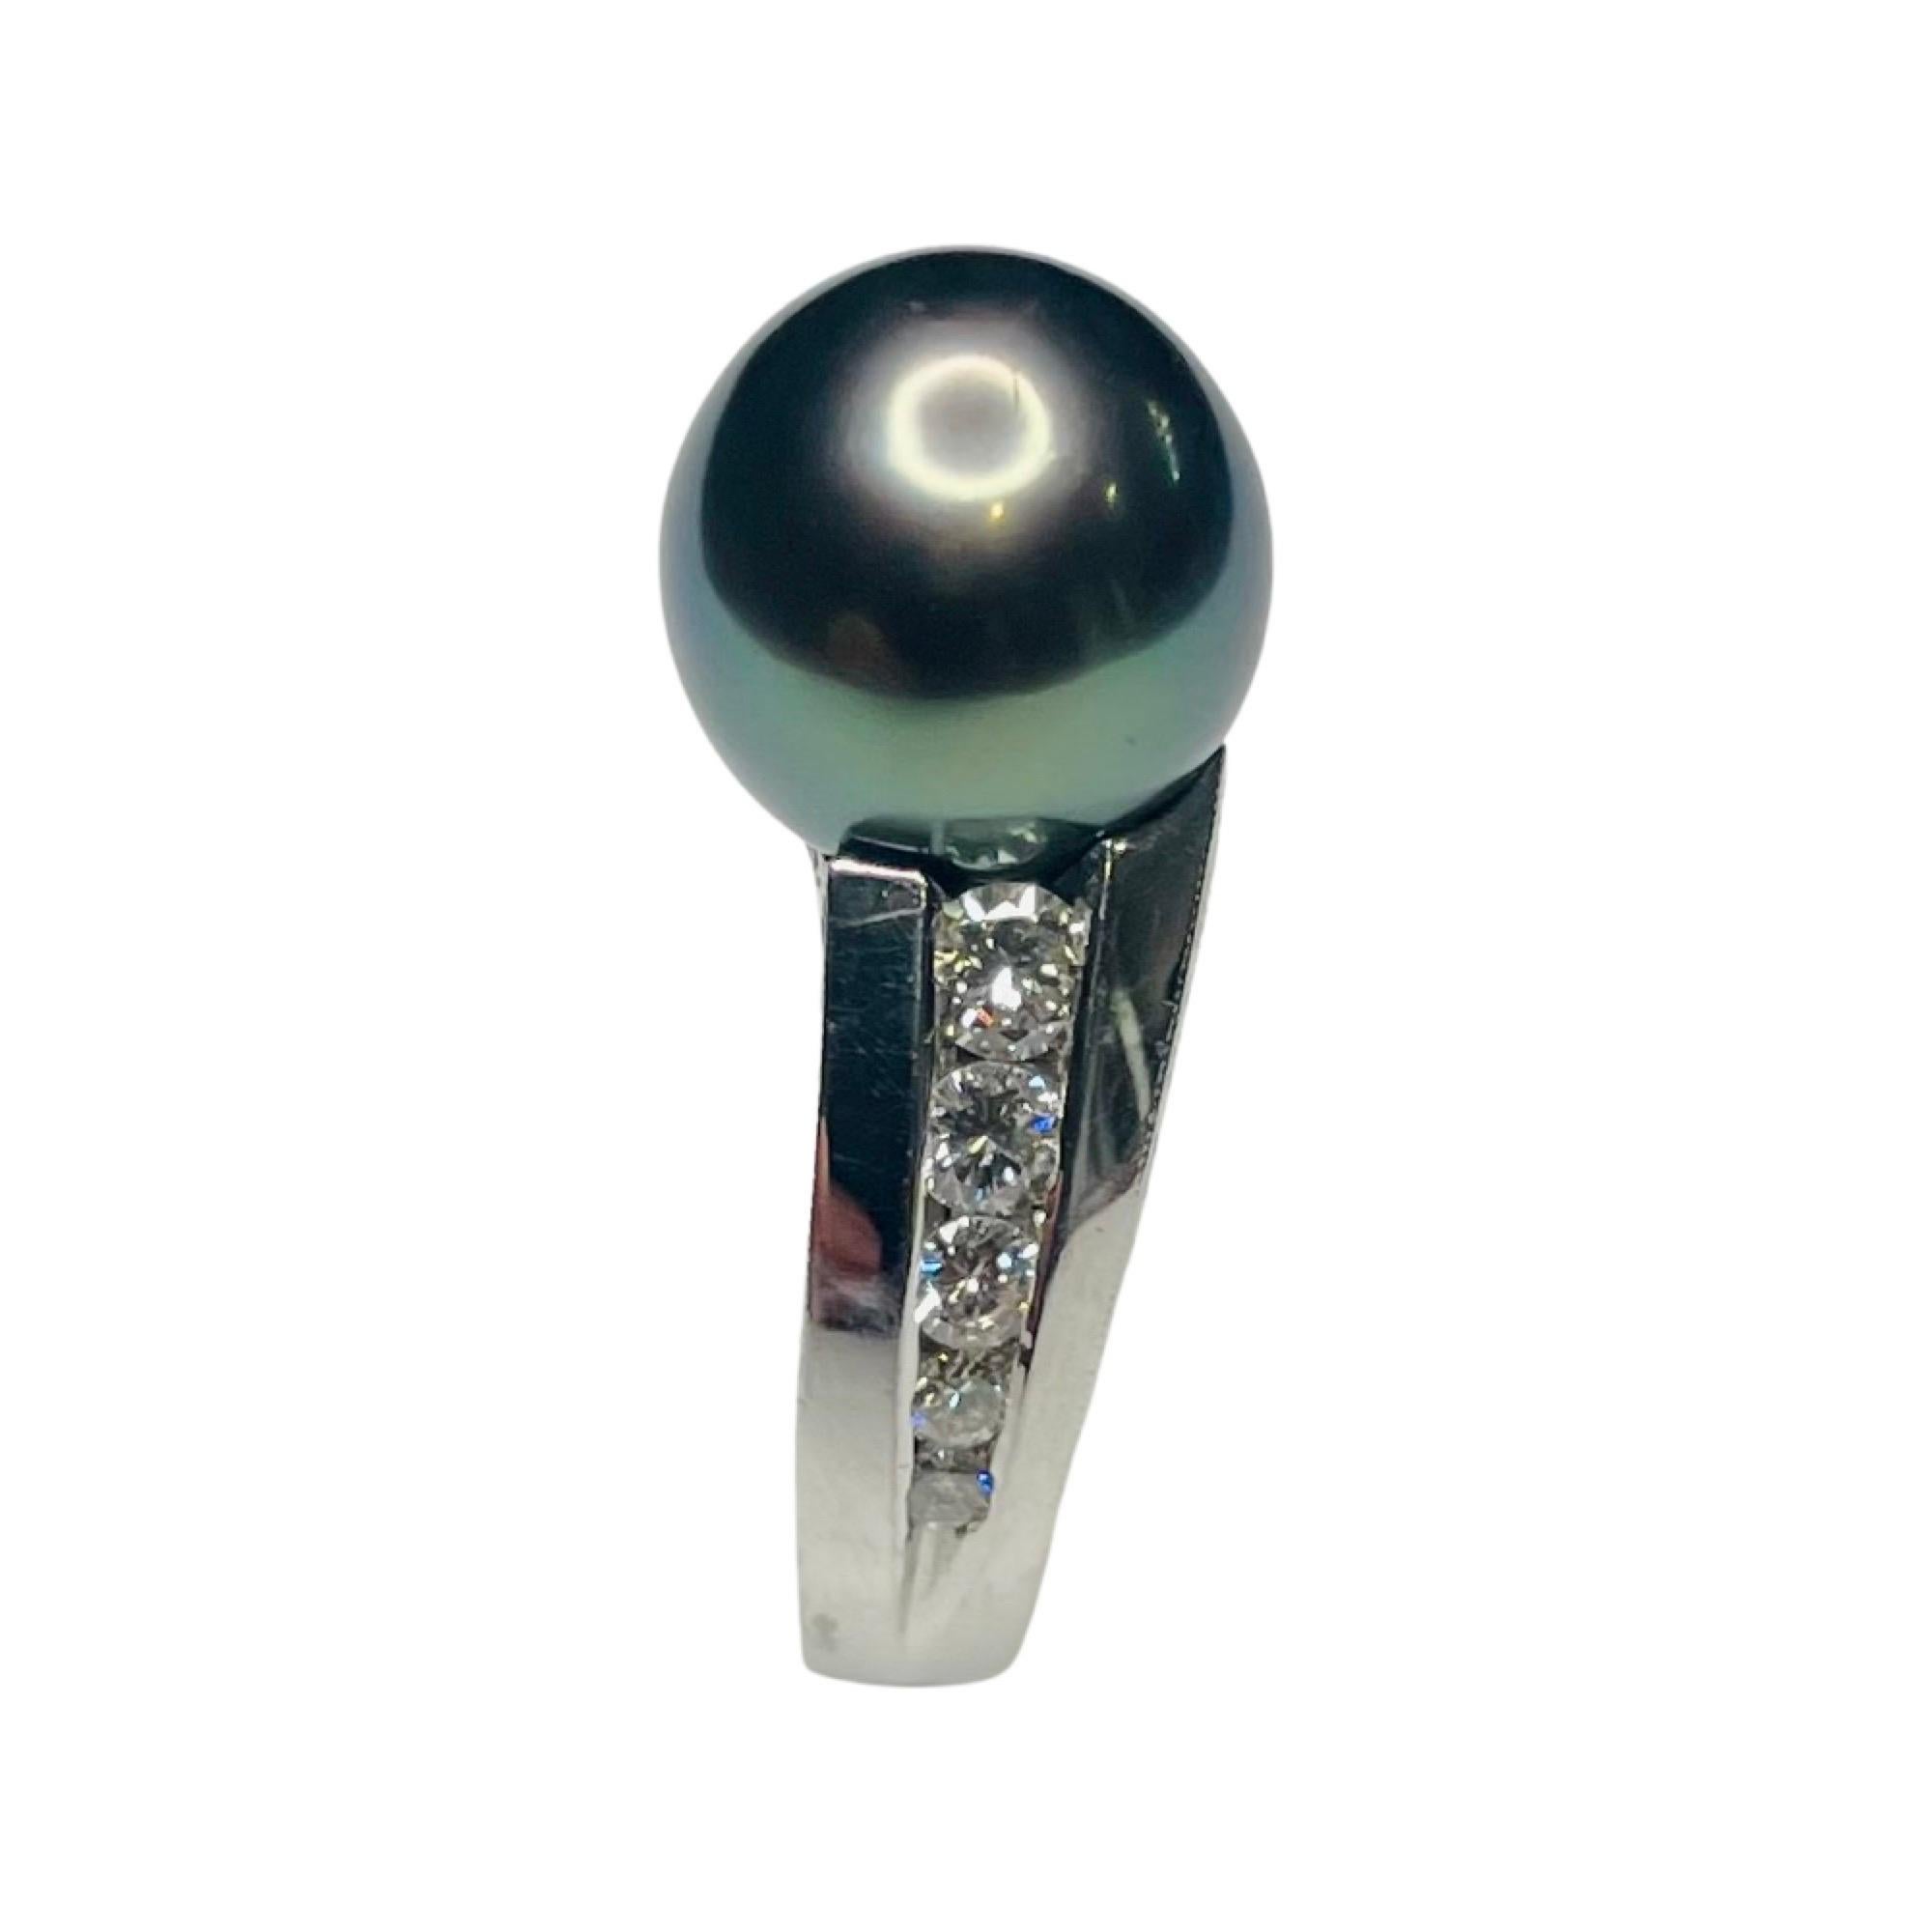 Majestic Art Platinum Cultured Natural Color Black Tahitian Pearl Hand Engraved Ring. The black Tahitian pearl is 10.6 mm.  The pearl is round with high luster and poe rava overtone. There are 10, channel set, full cut round brilliant diamonds for a